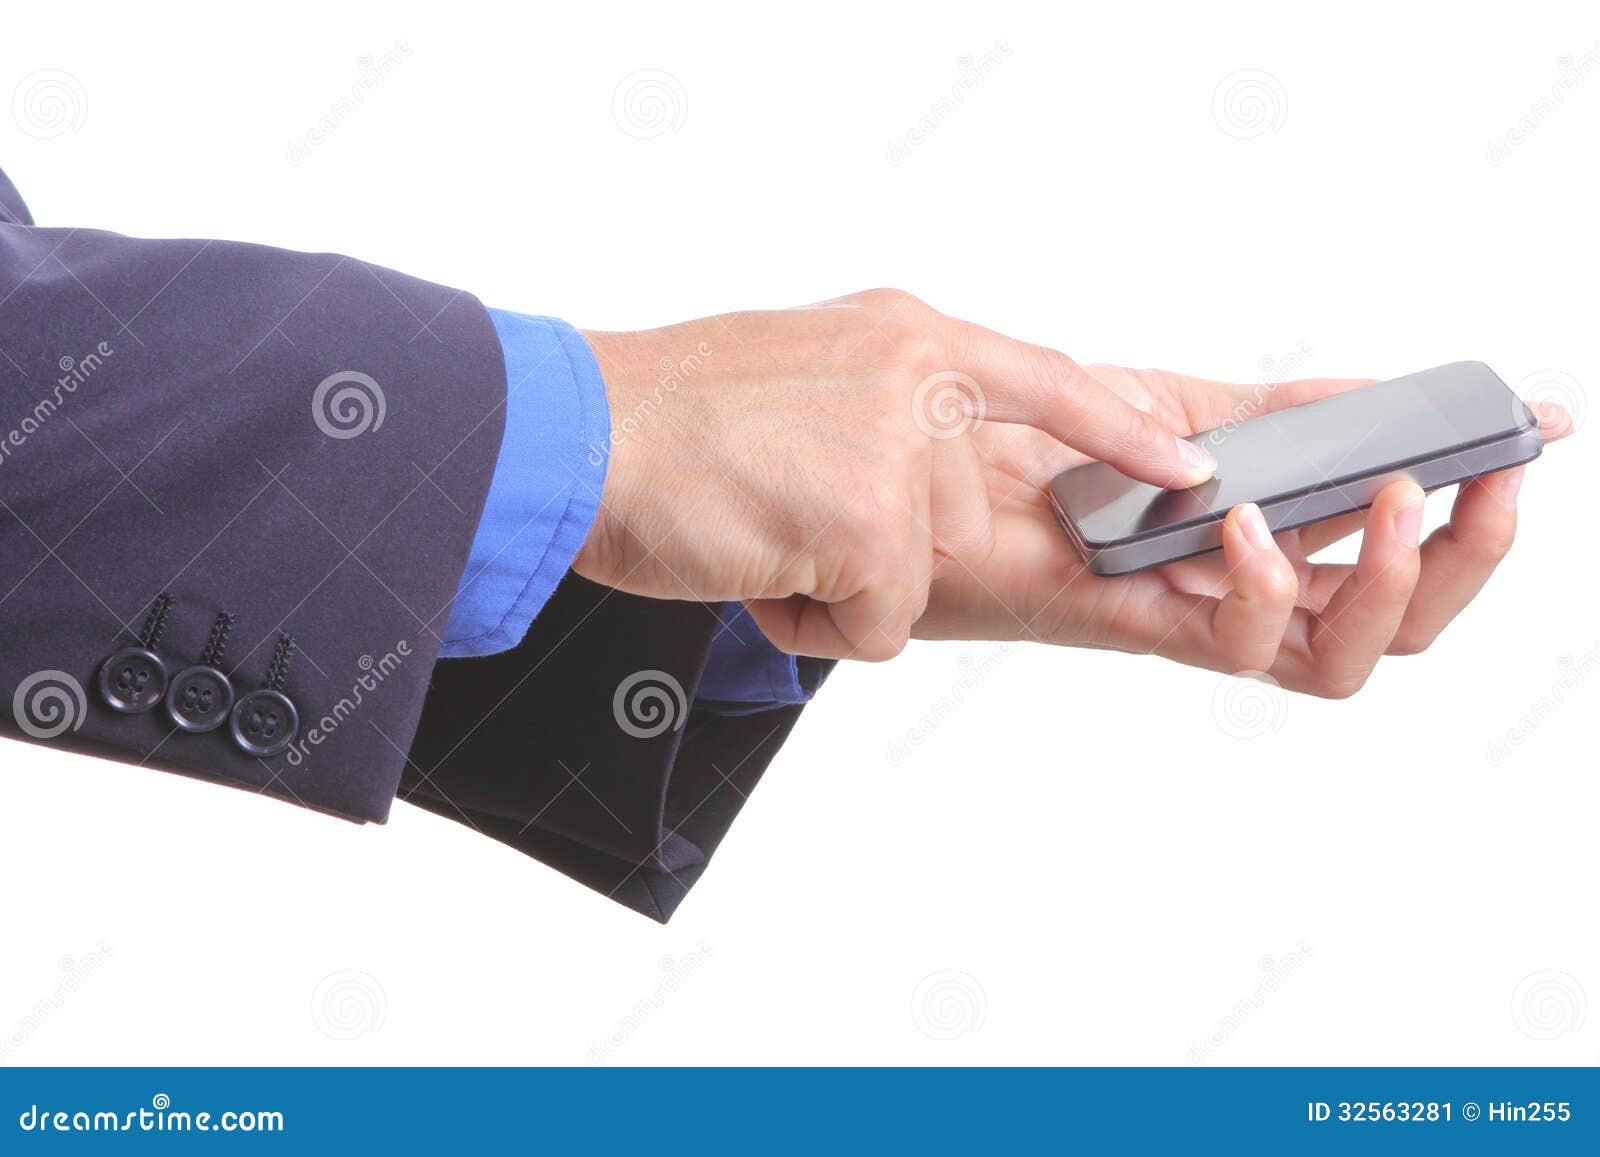 Use Finger Touch Smart Phone Stock Image - Image: 32563281